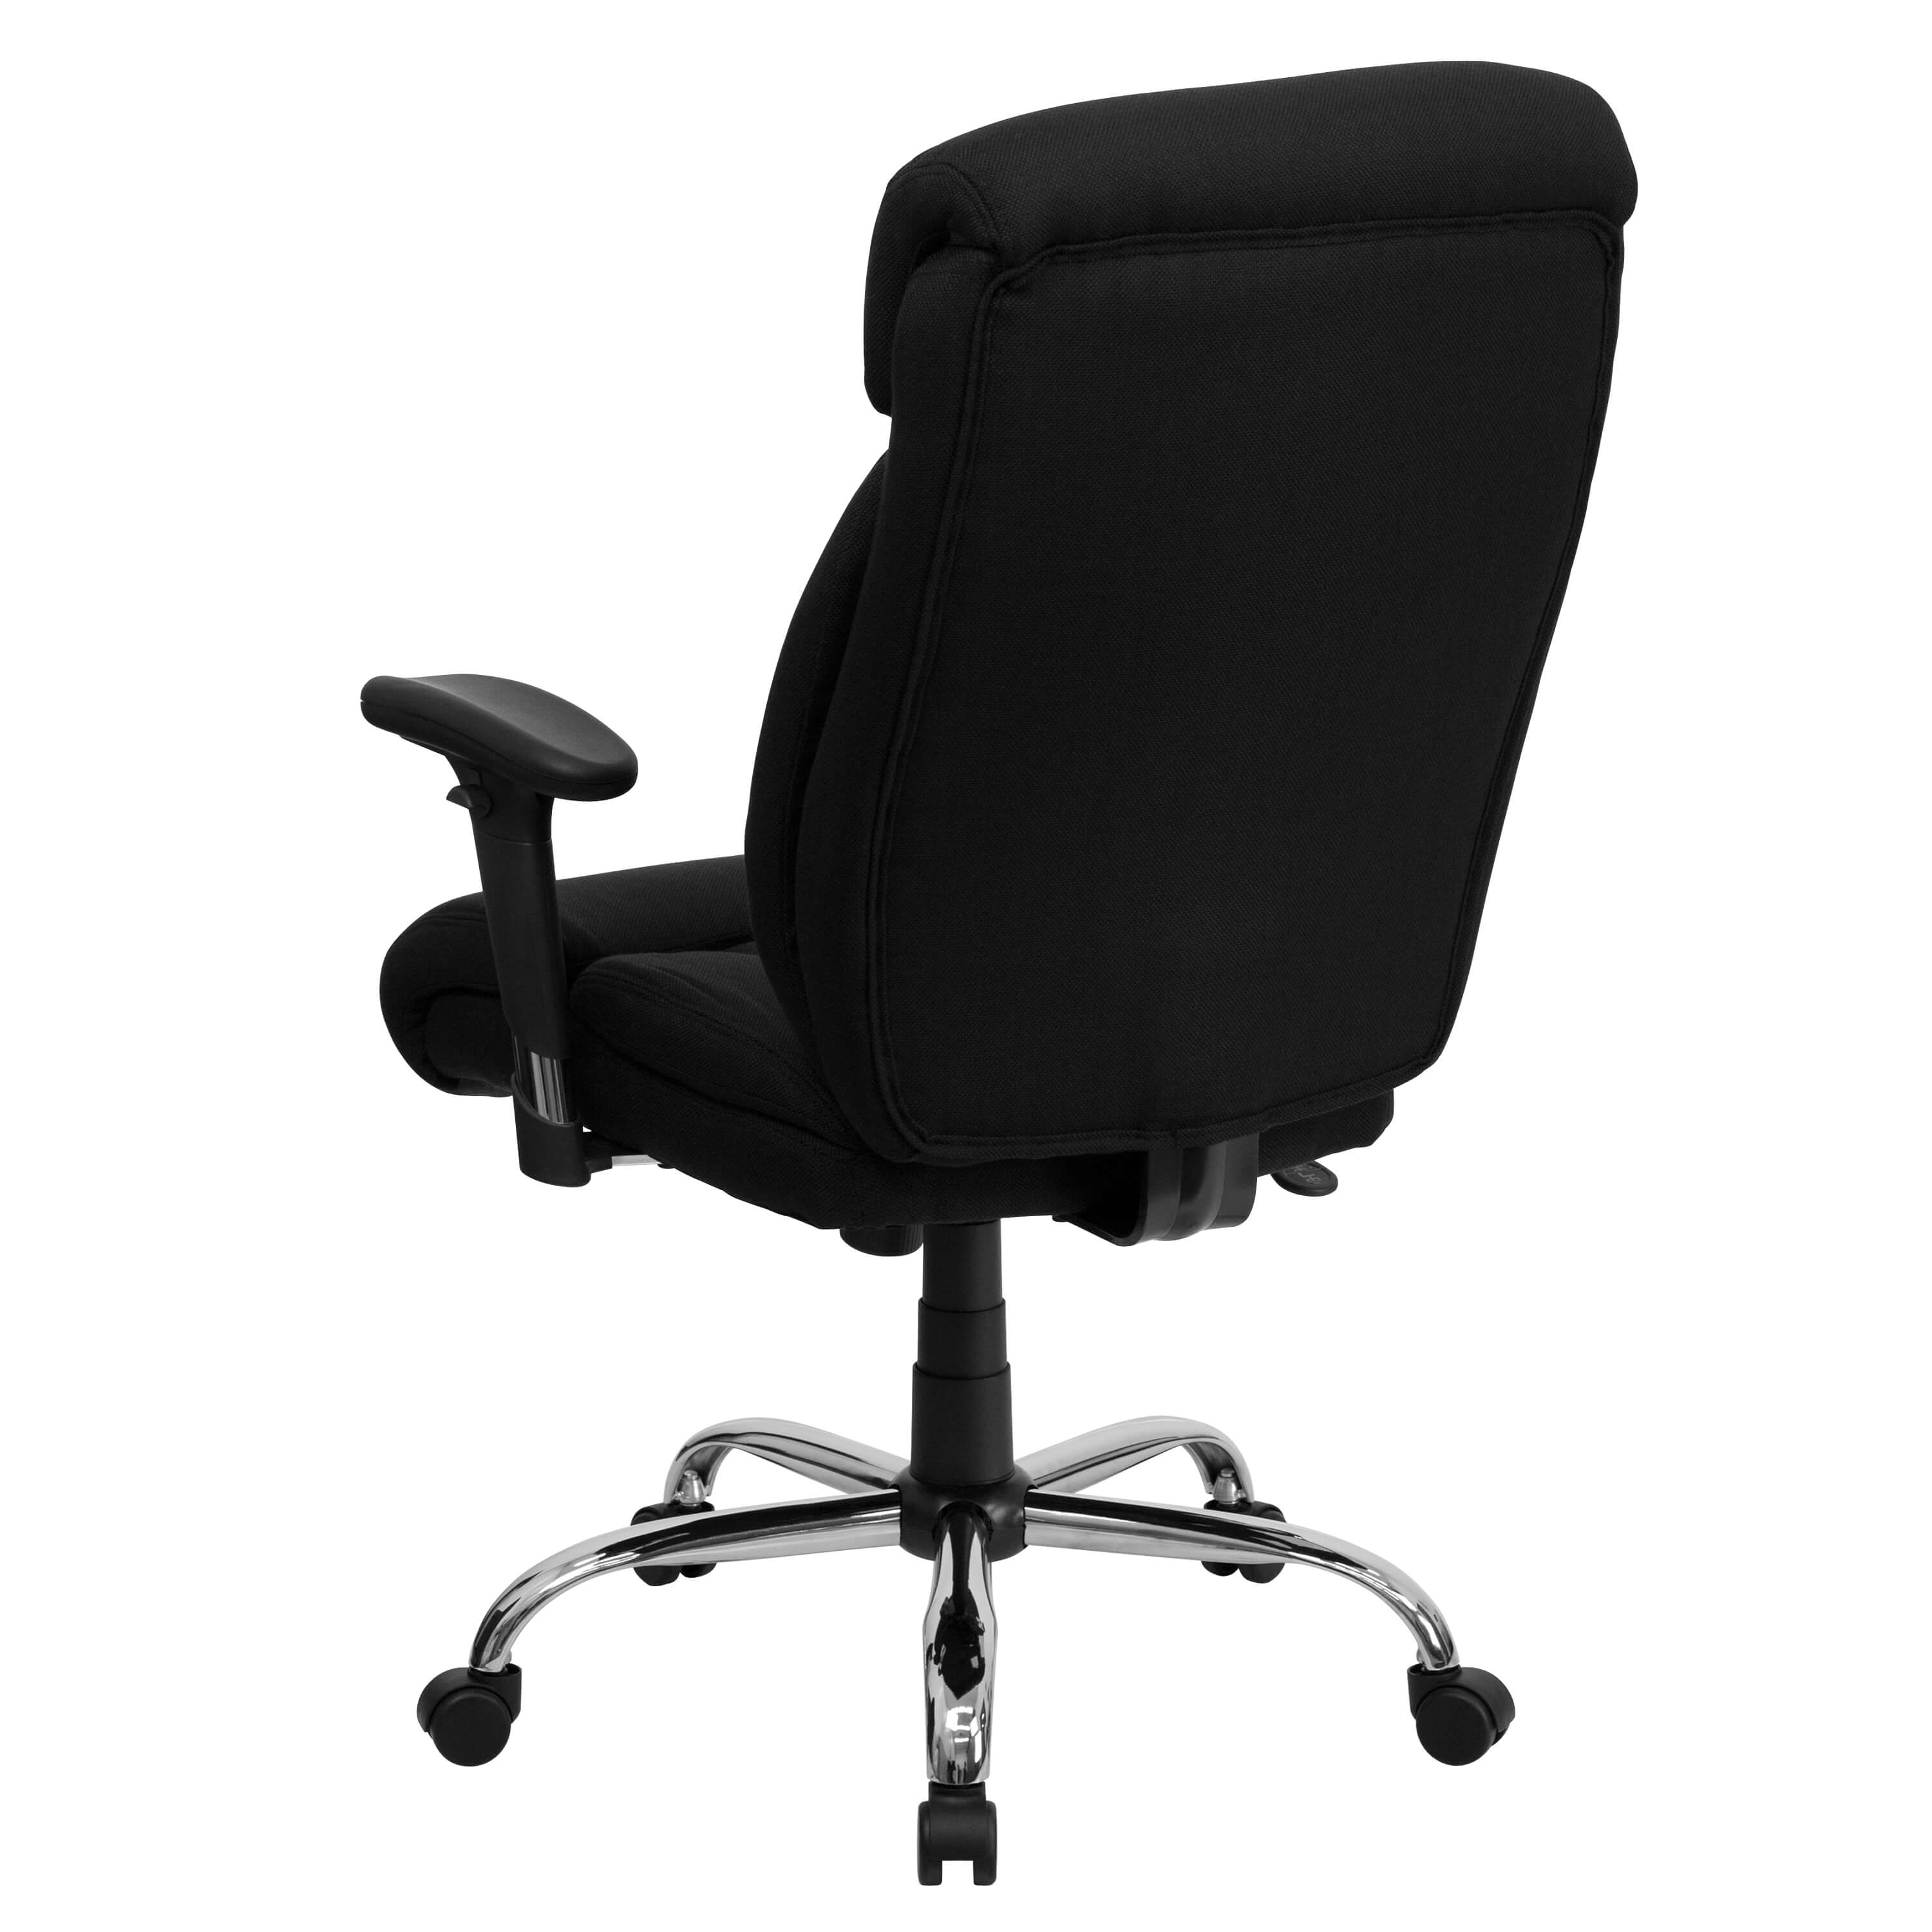 Heavy duty ergonomic office chairs back view